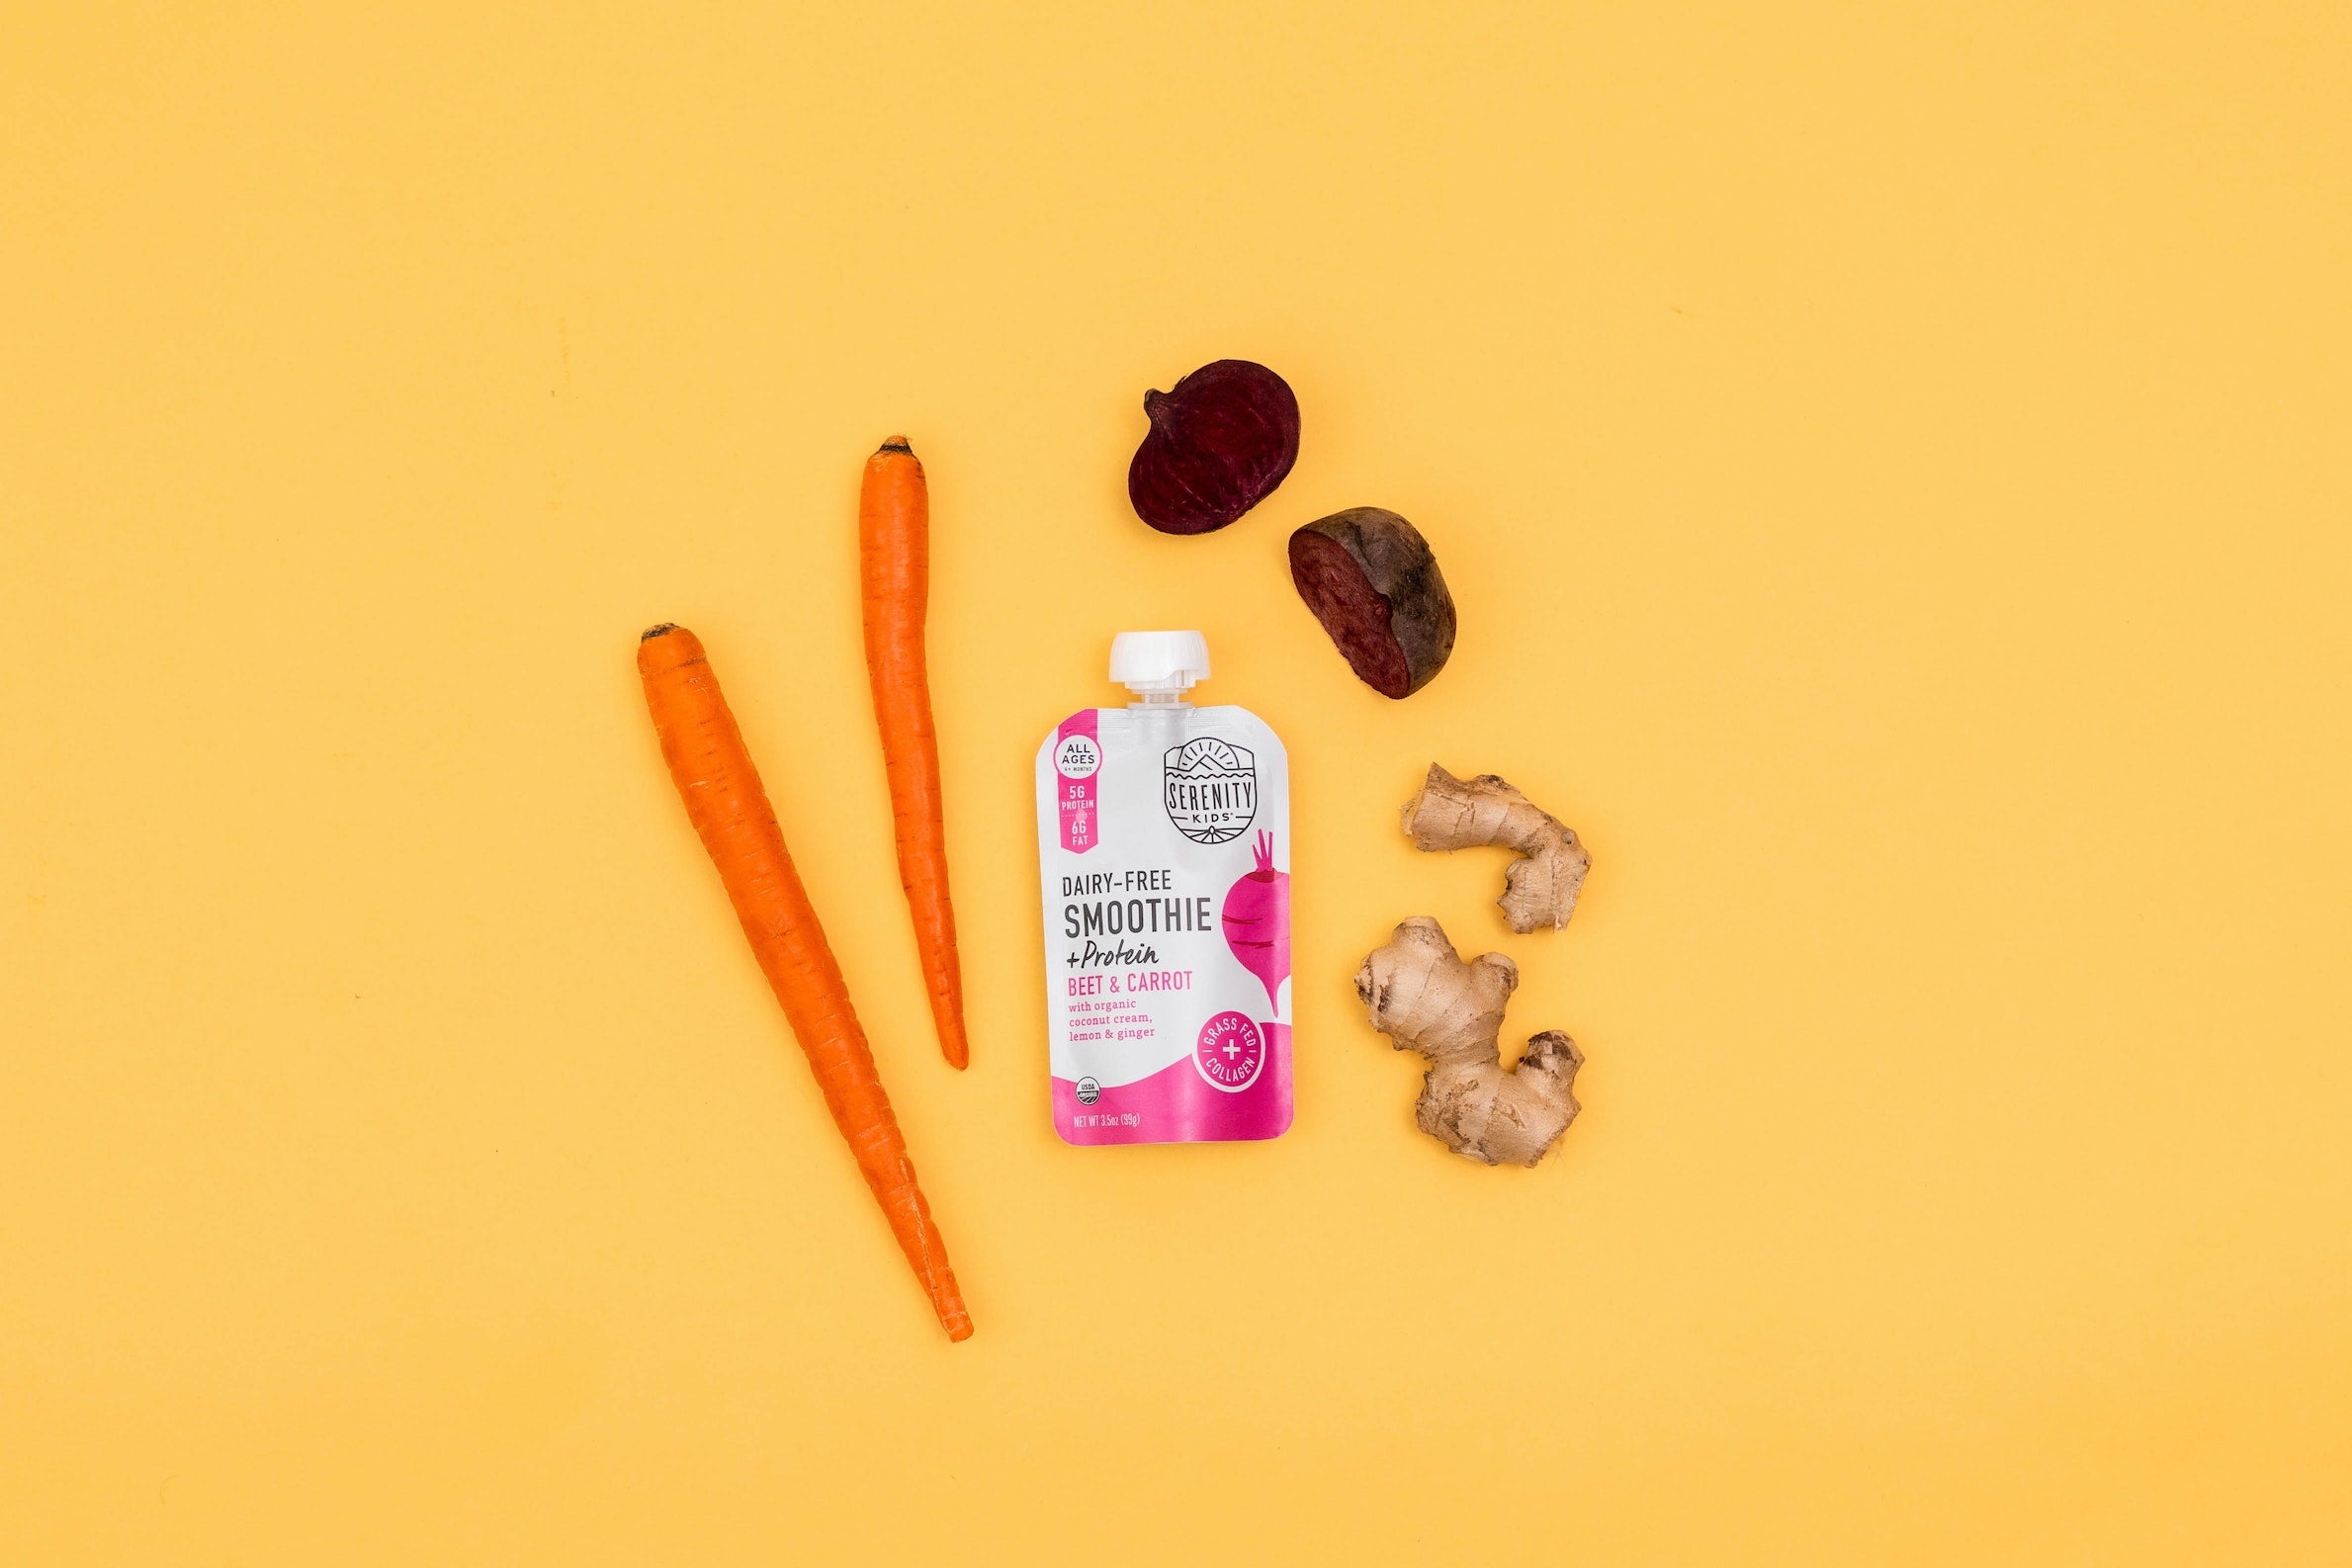 Beet & Carrot Dairy-Free Smoothie + Protein